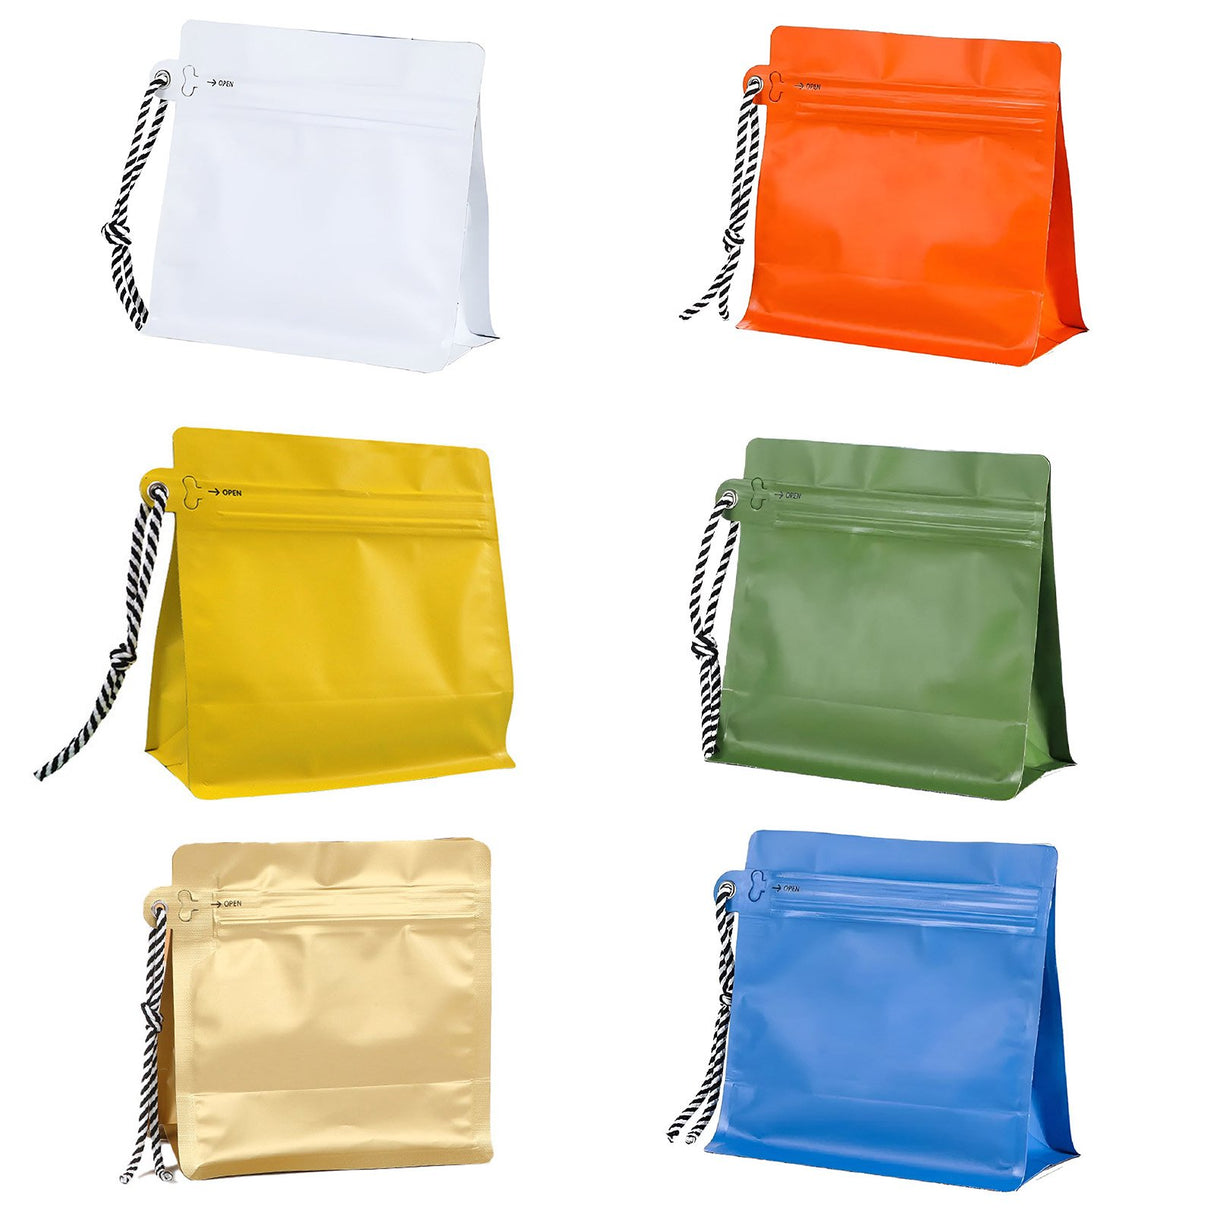 Convenient and Durable Lanyard Ziplock Bag for Secure Storage